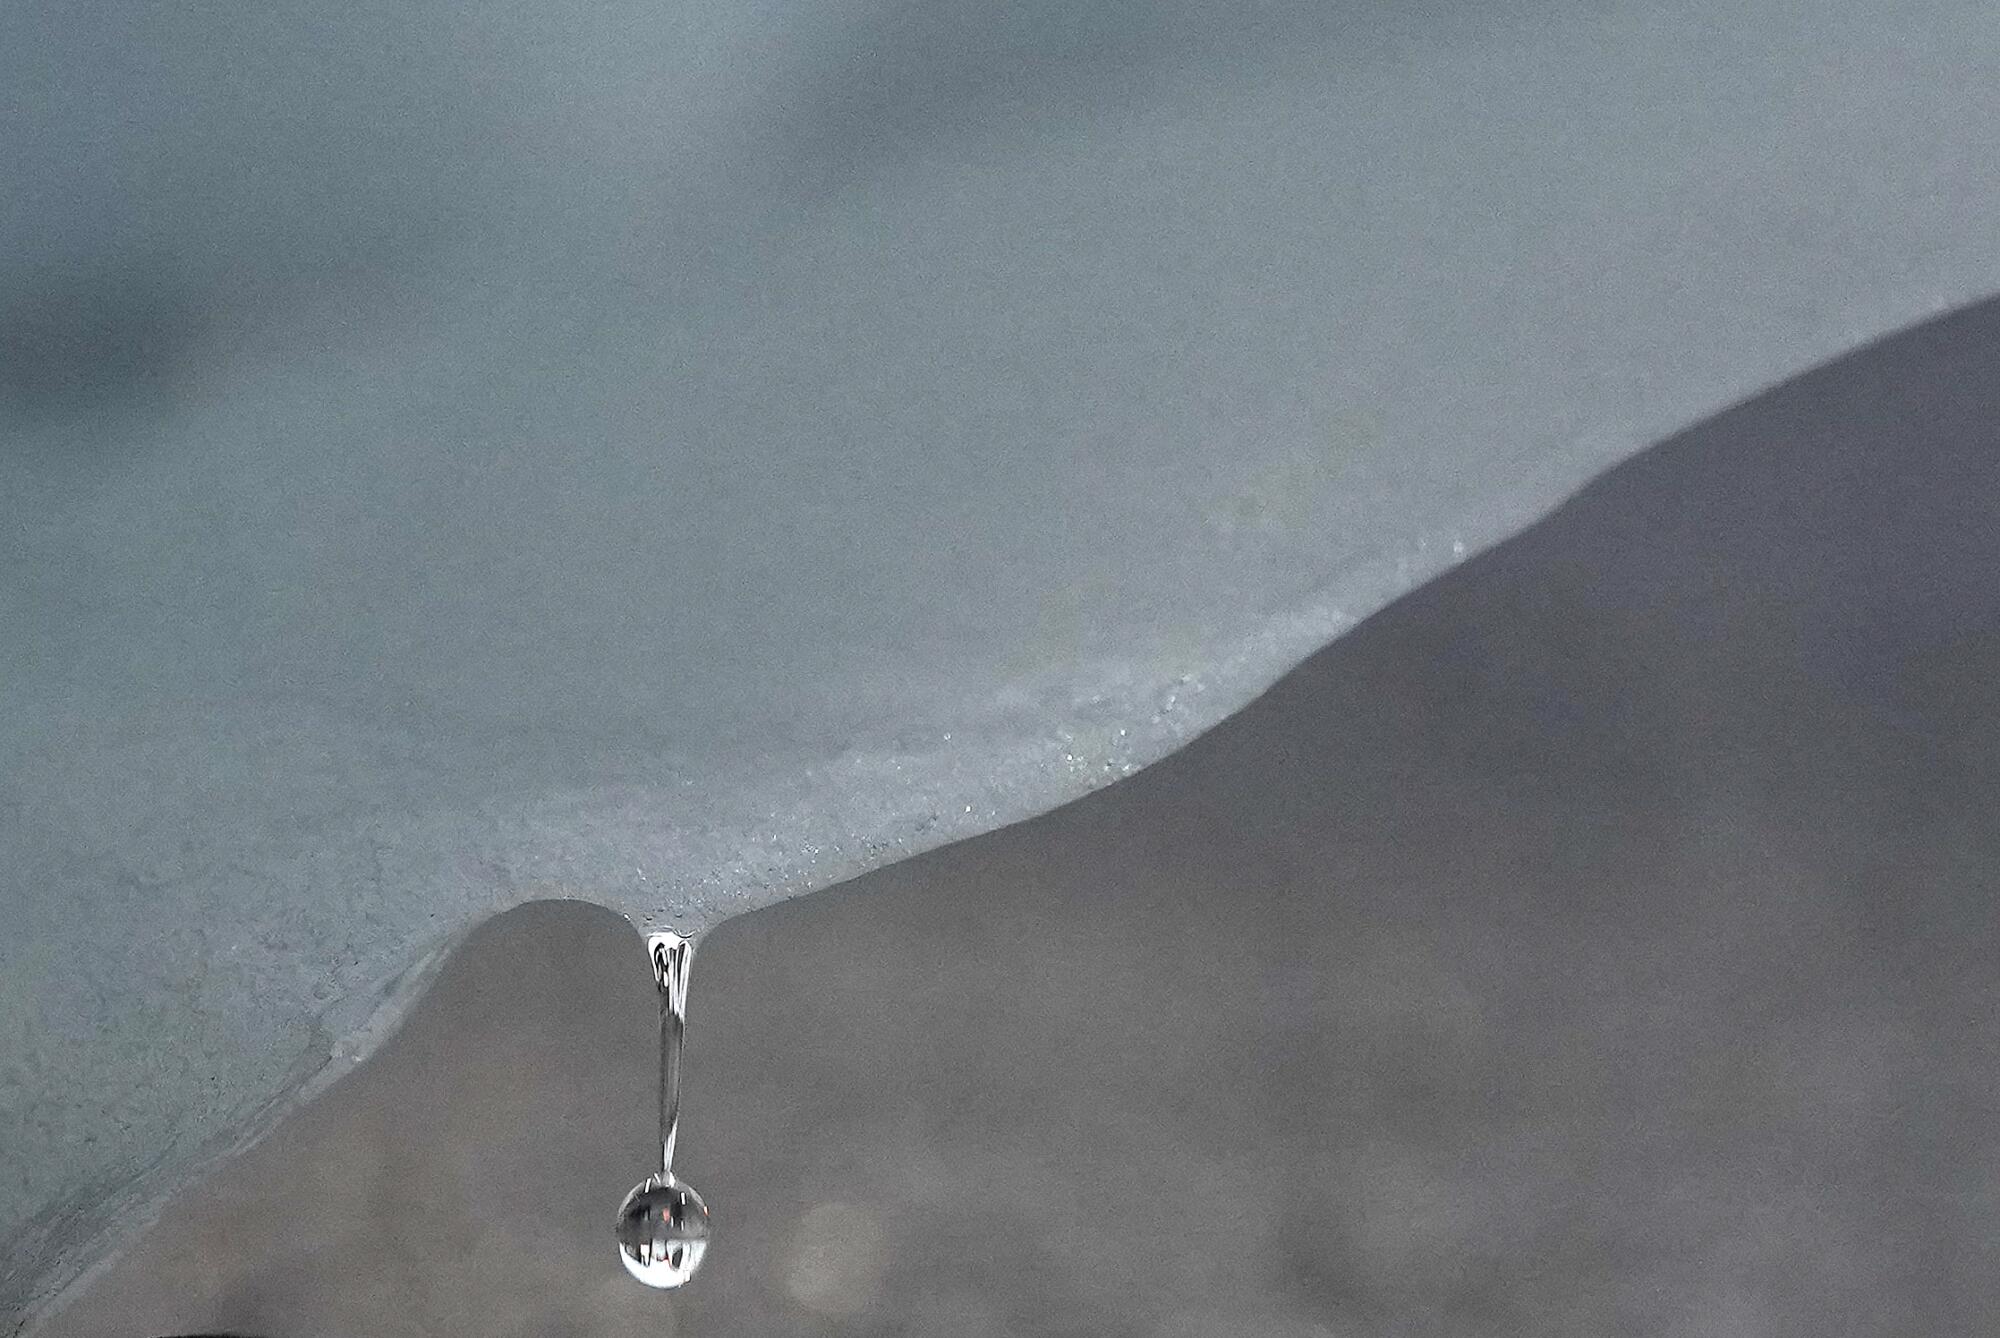 A droplet of water falls from an iceberg.